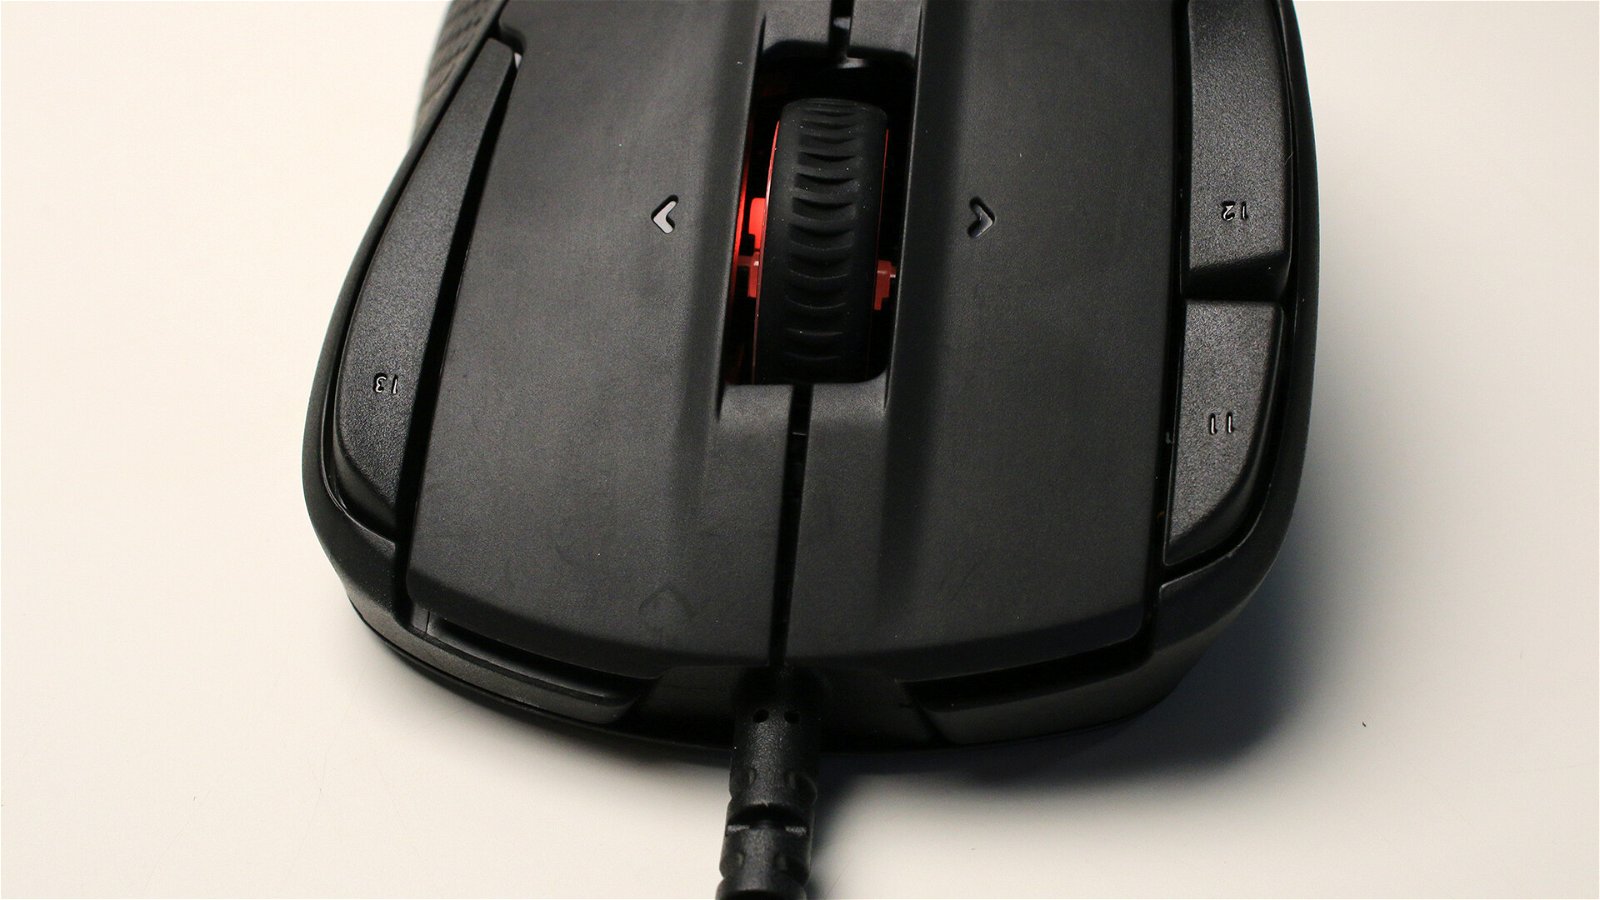 Steelseries Rival 500 Gaming Mouse (Hardware) Review